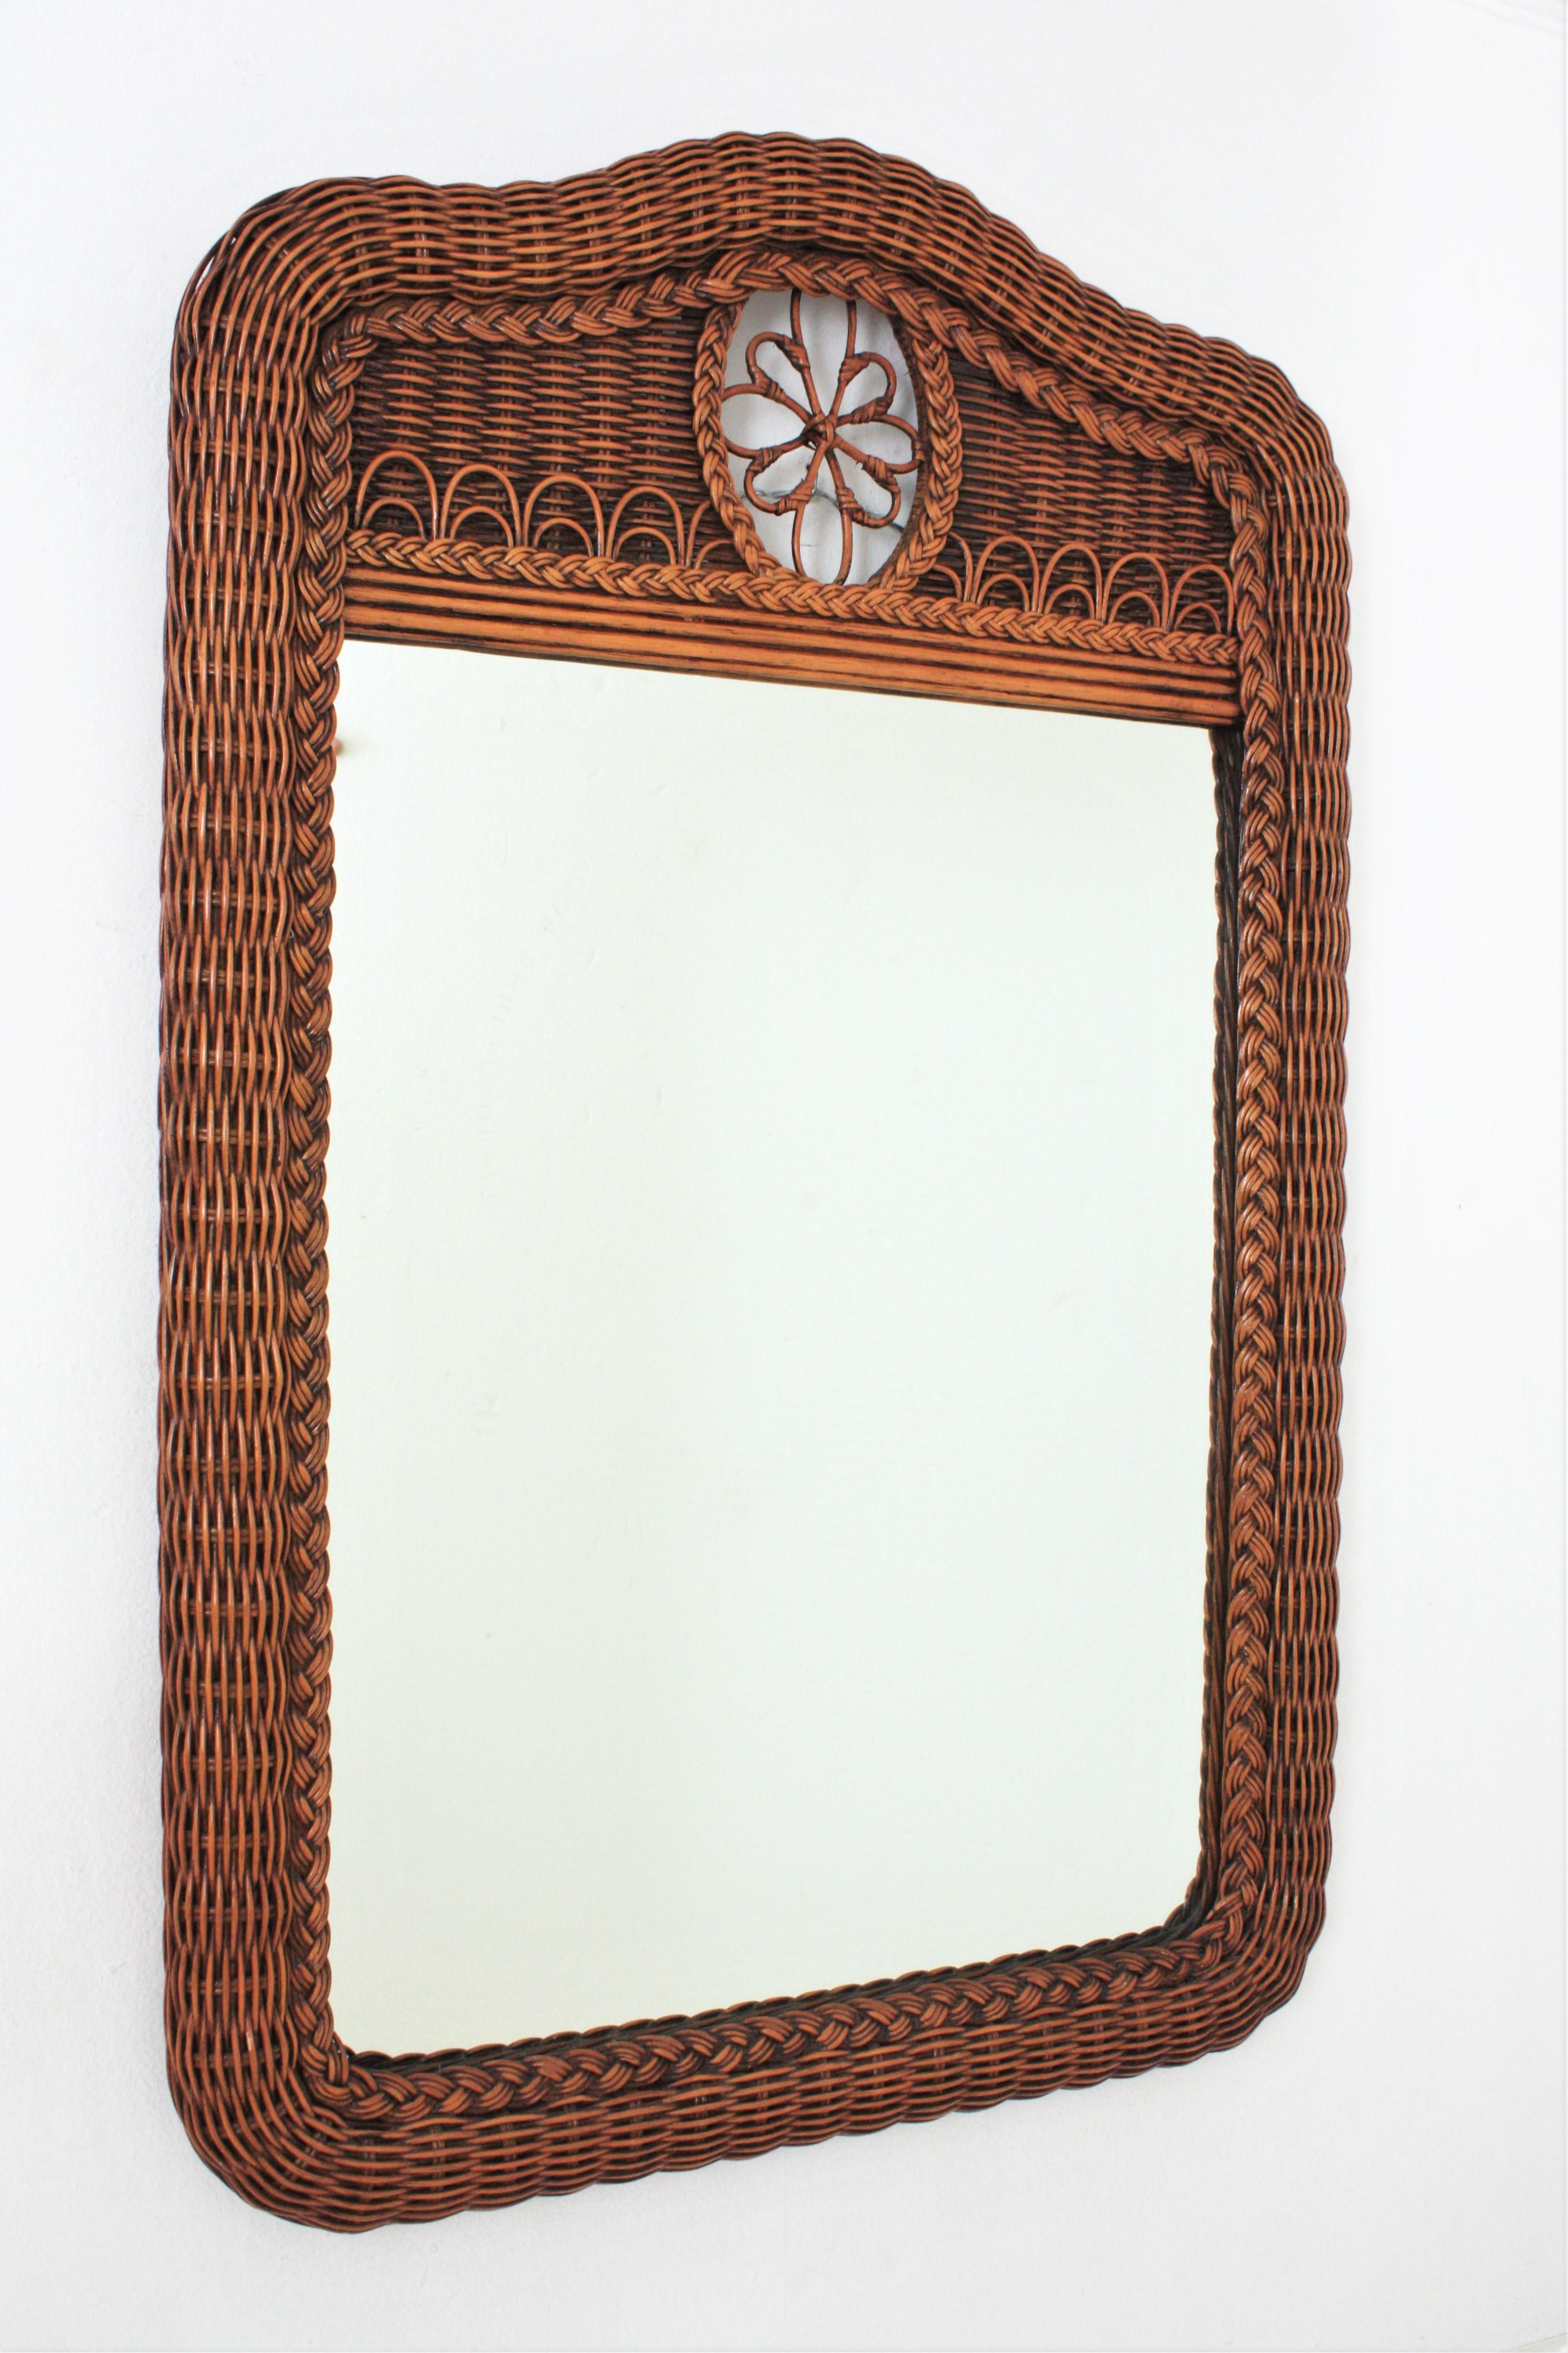 Eyecatching woven rattan large mirror with crest. Spain, 1970s.
This beautiful wall mirror or console mirror features a thick frame made of braided rattan. The arched top is adorned by a flower decorative detail.
This mirrow will be a nice addition